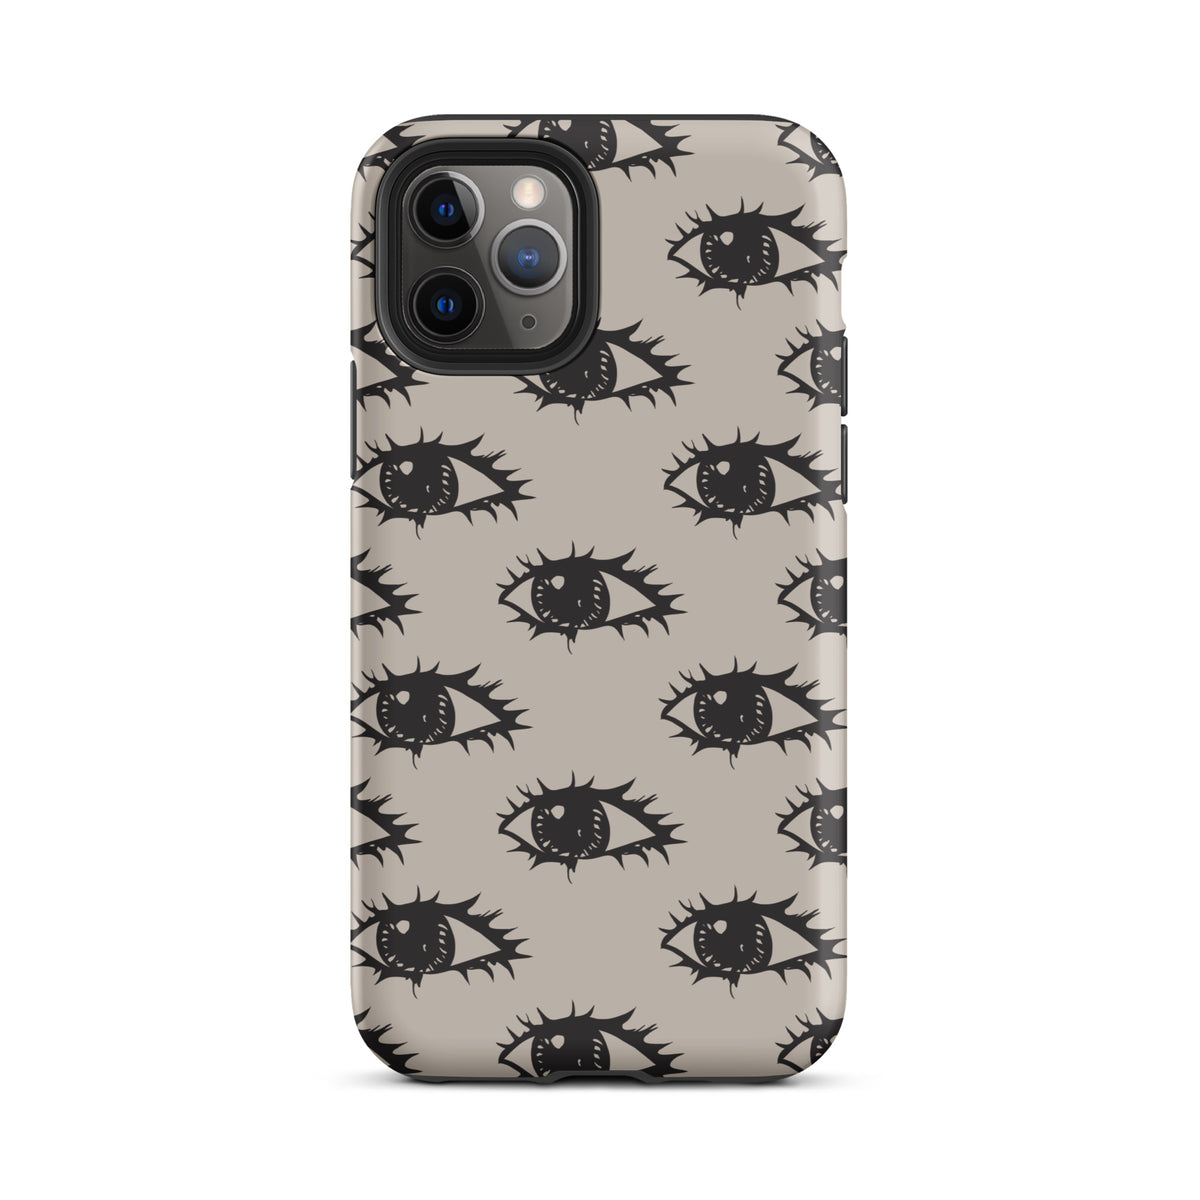 Tan Iphone phone case with eyes